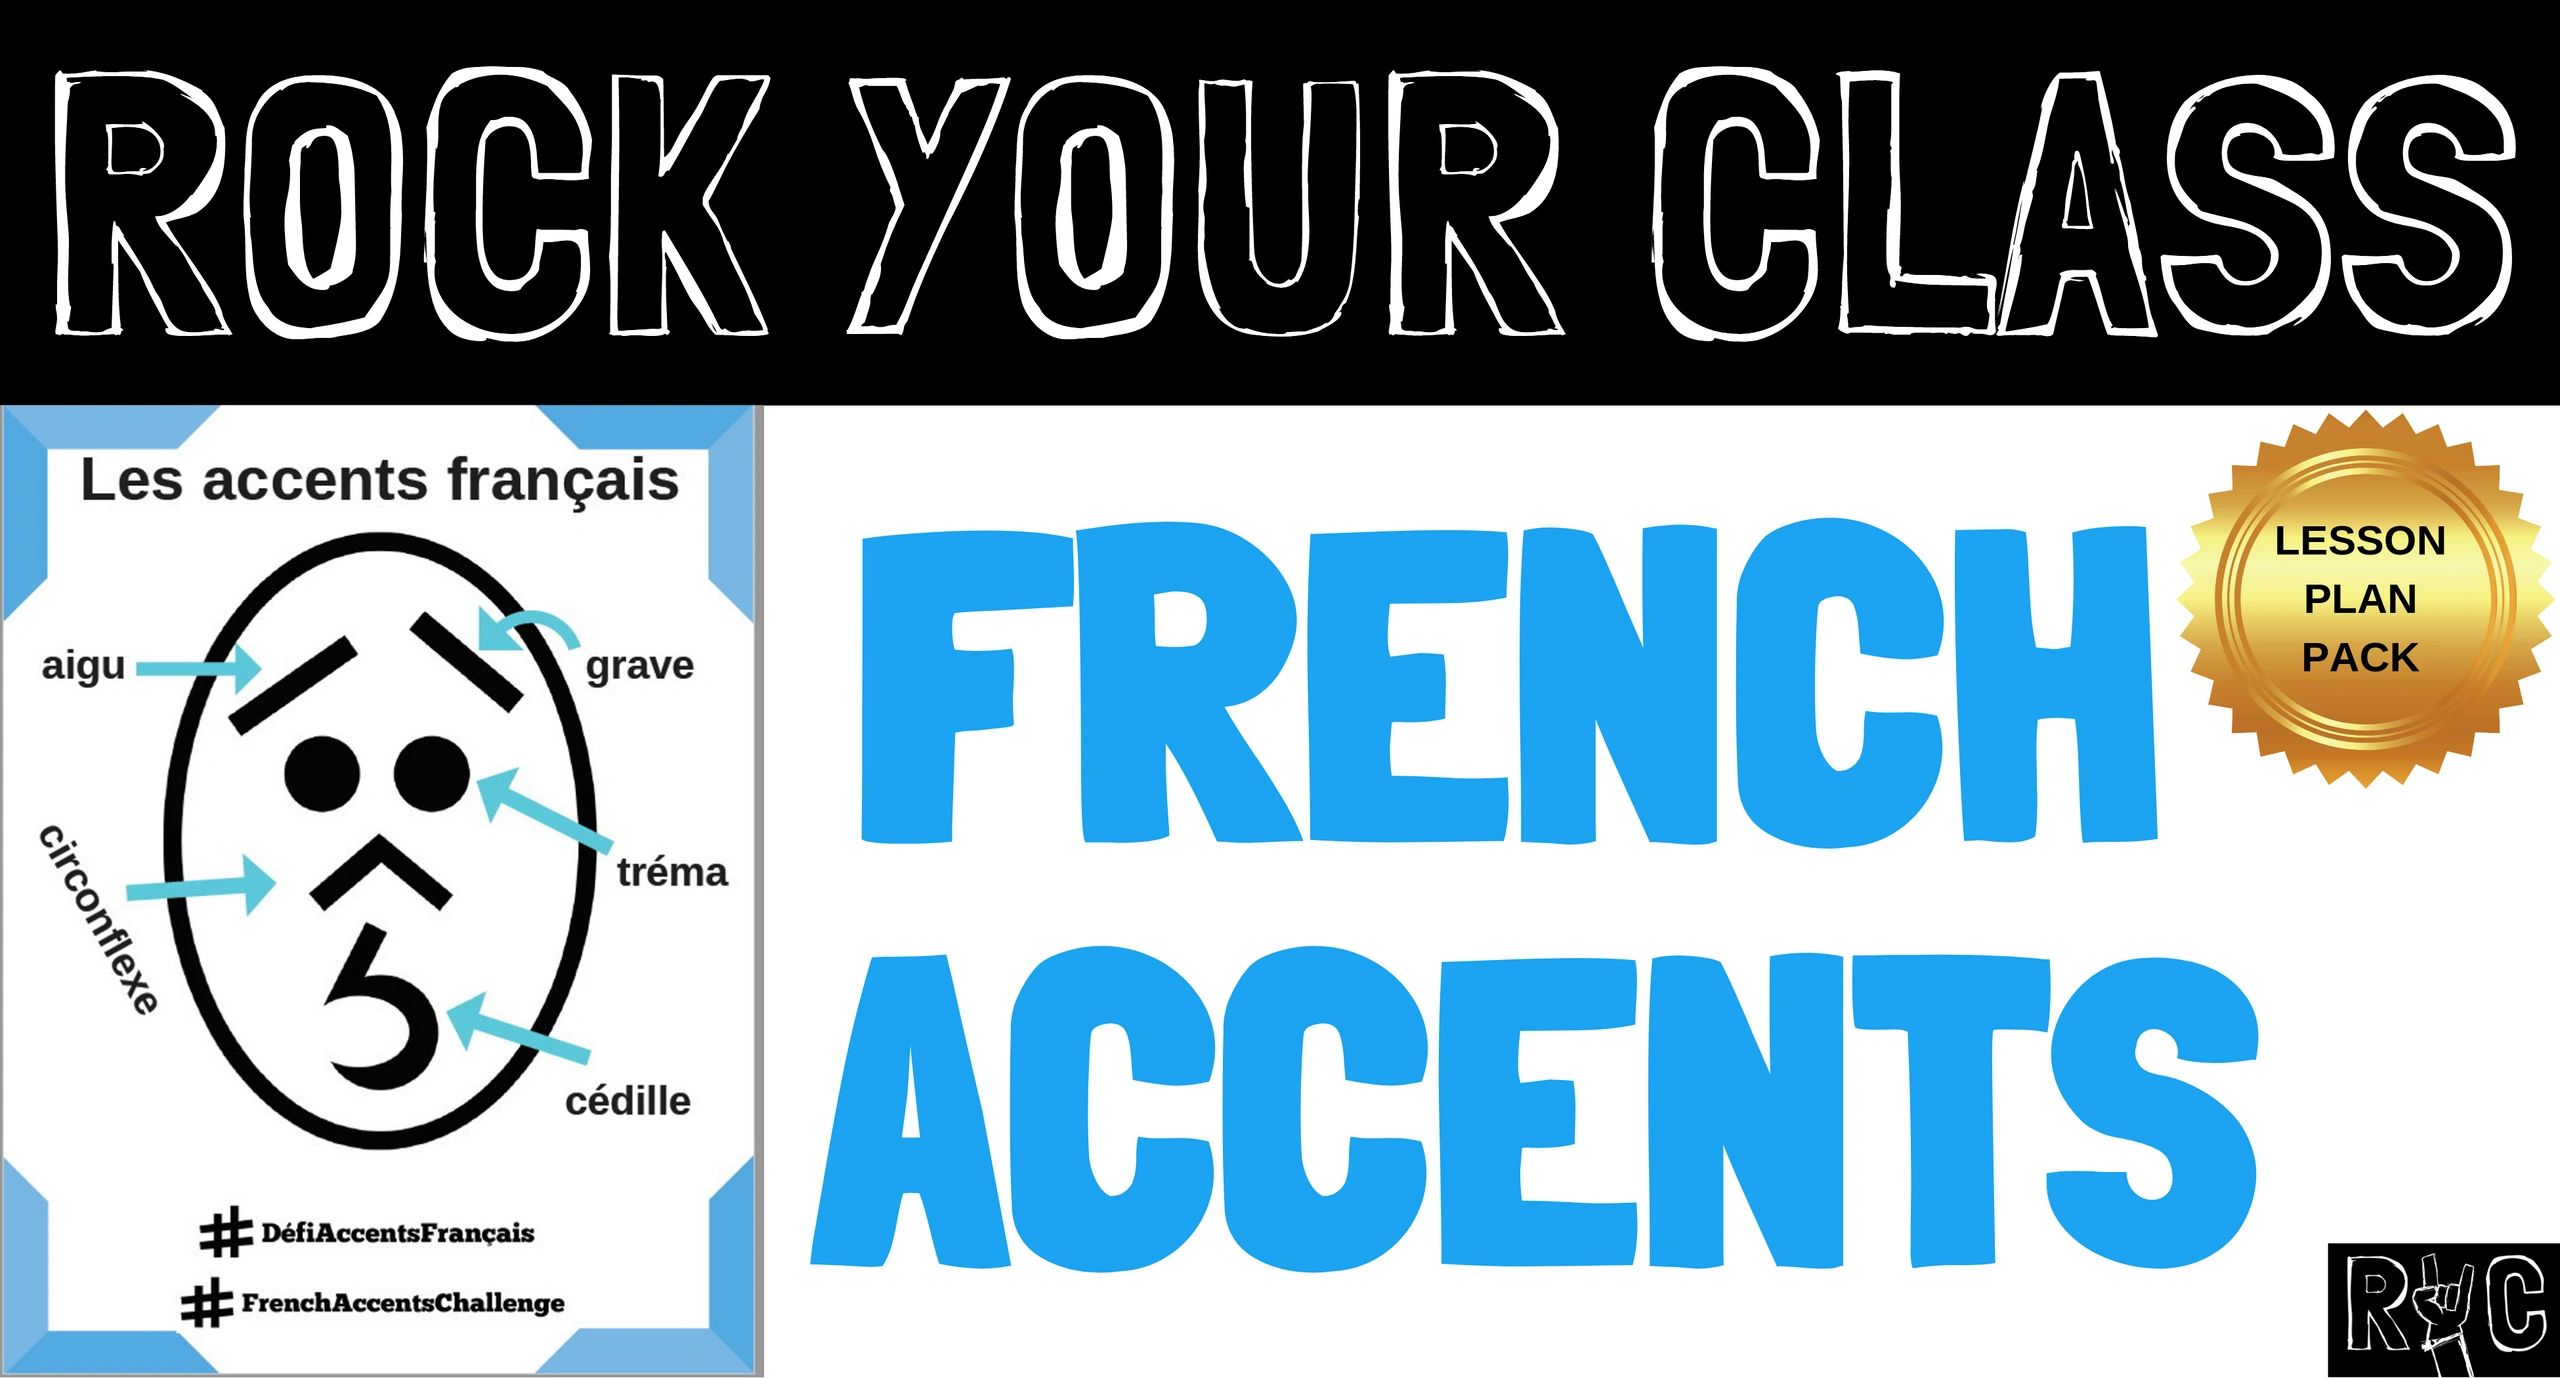 23 French Accents Challenge Rock Your Class Ro 